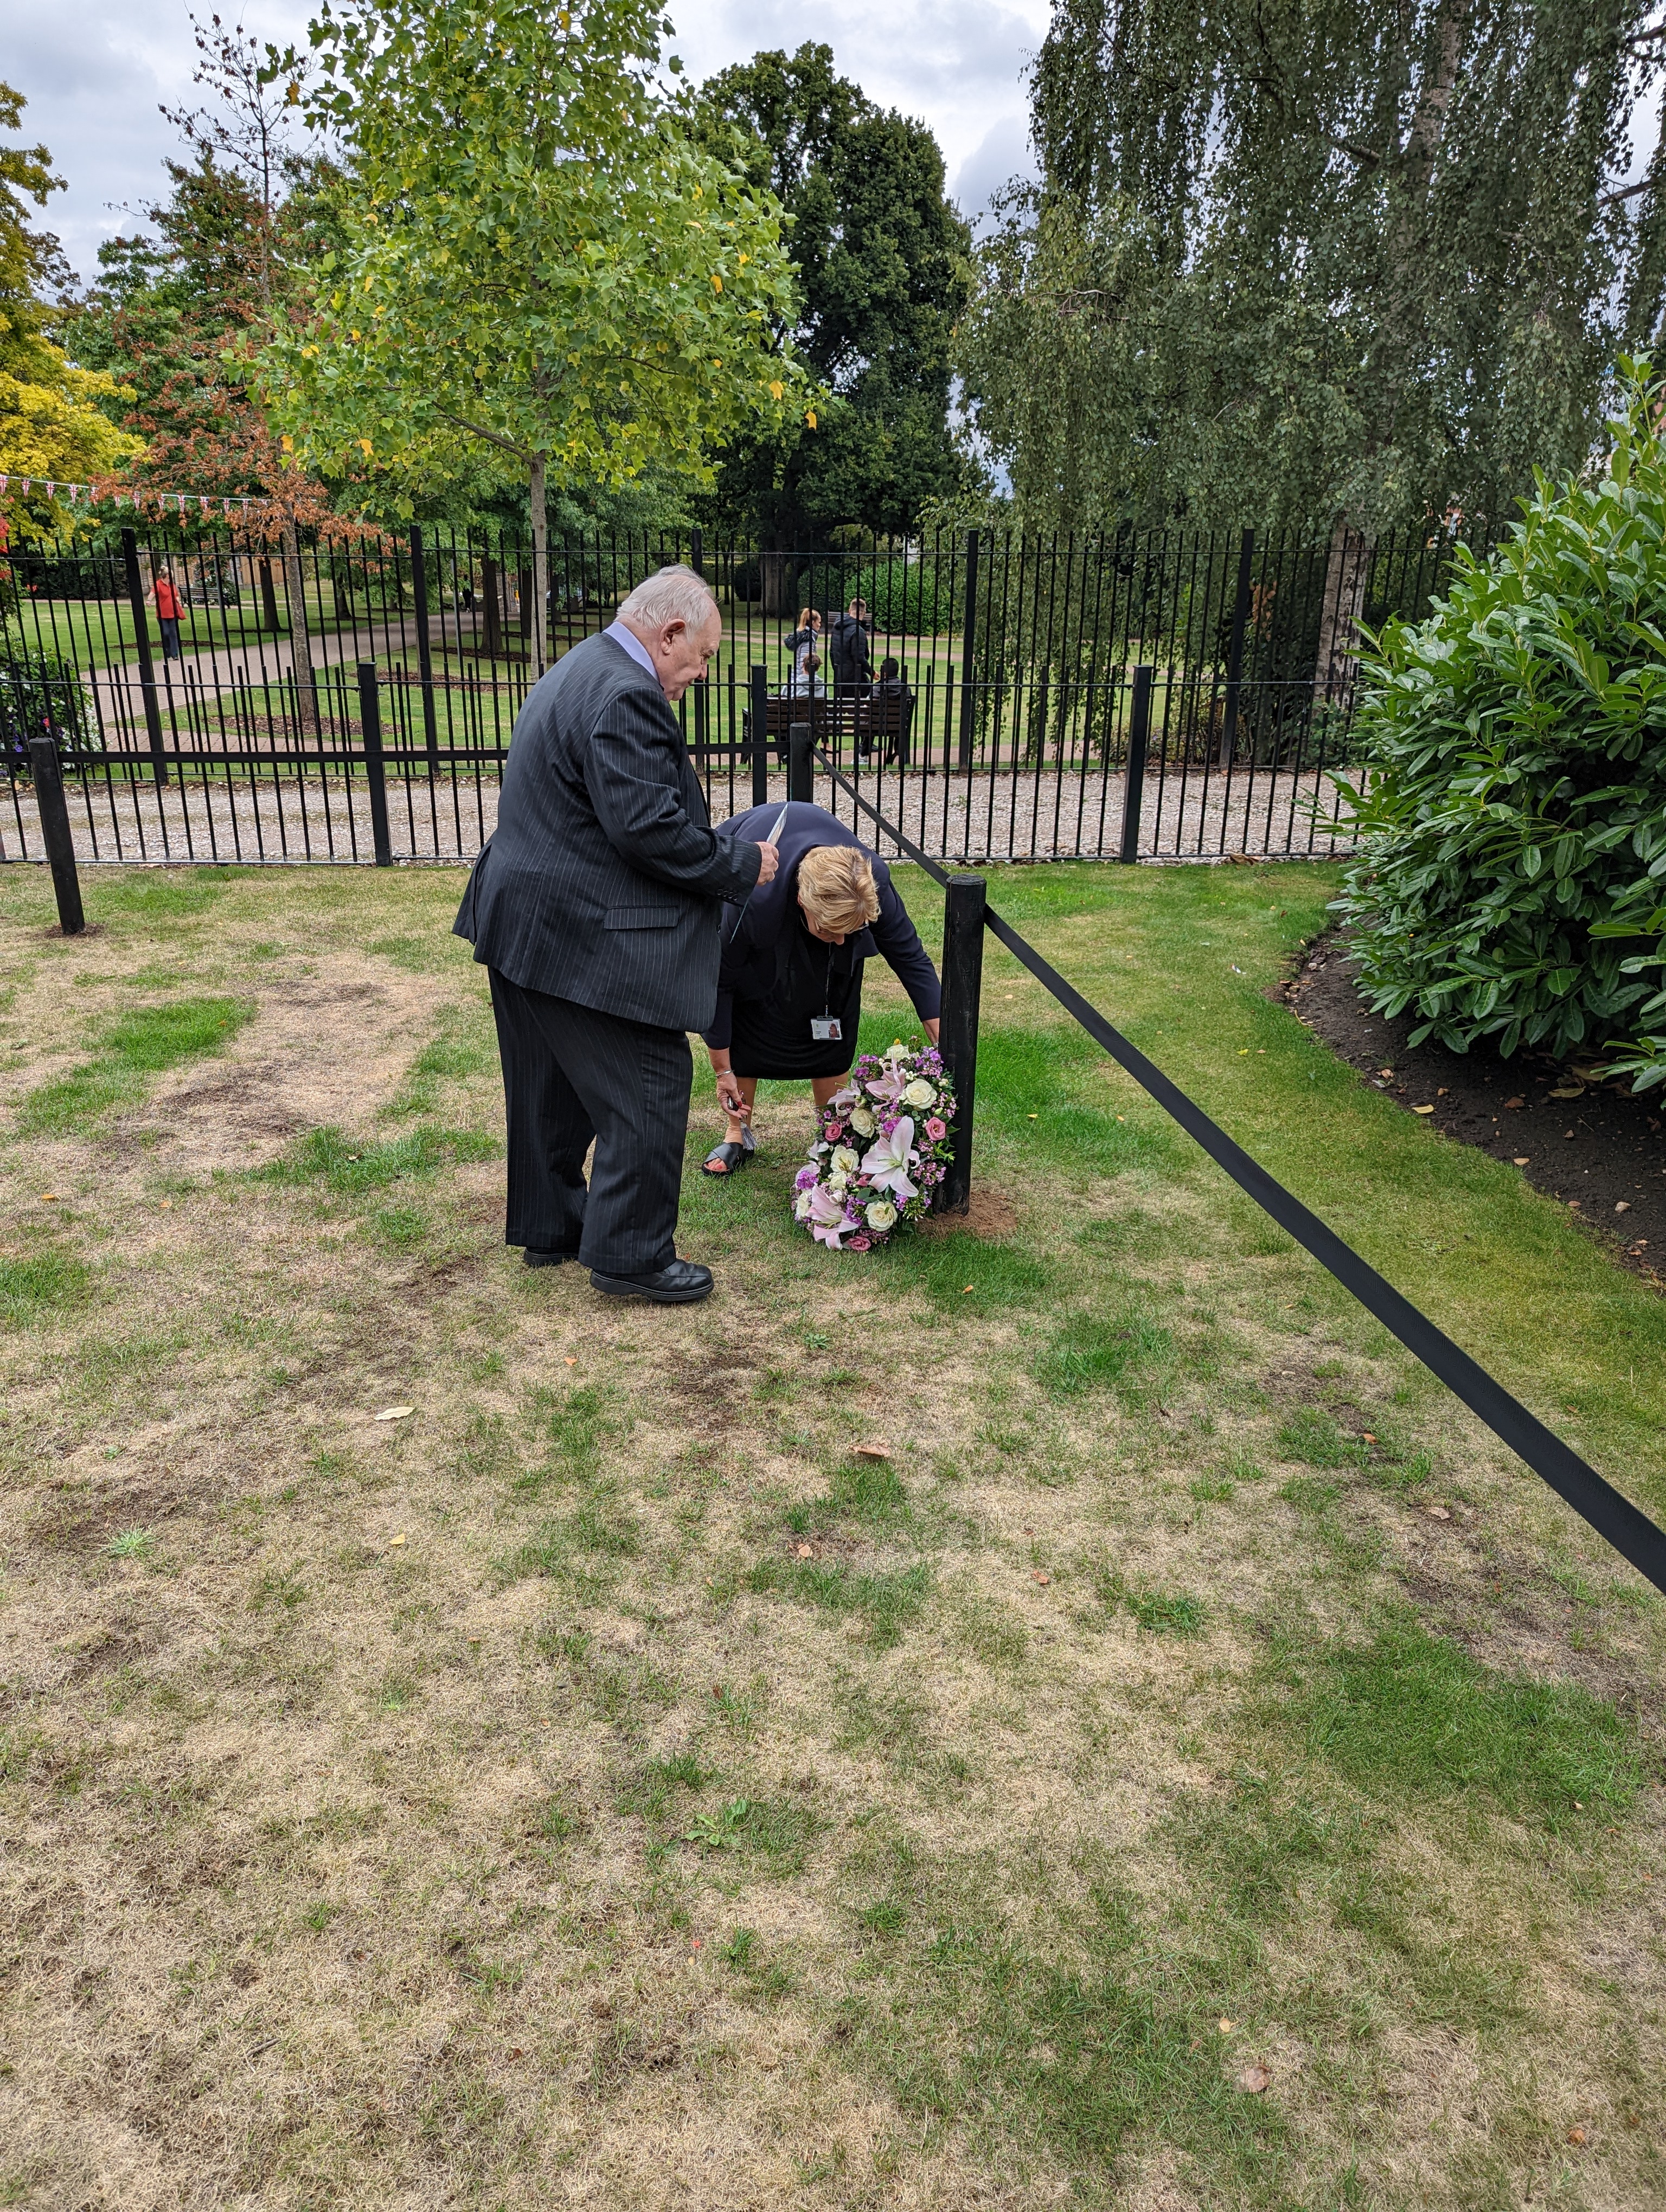 Image entitled Ashford Borough Council Leader Cllr Gerry Clarkson and Chief Executive Tracey Kerly laying the first floral tribute at the Memorial Gardens